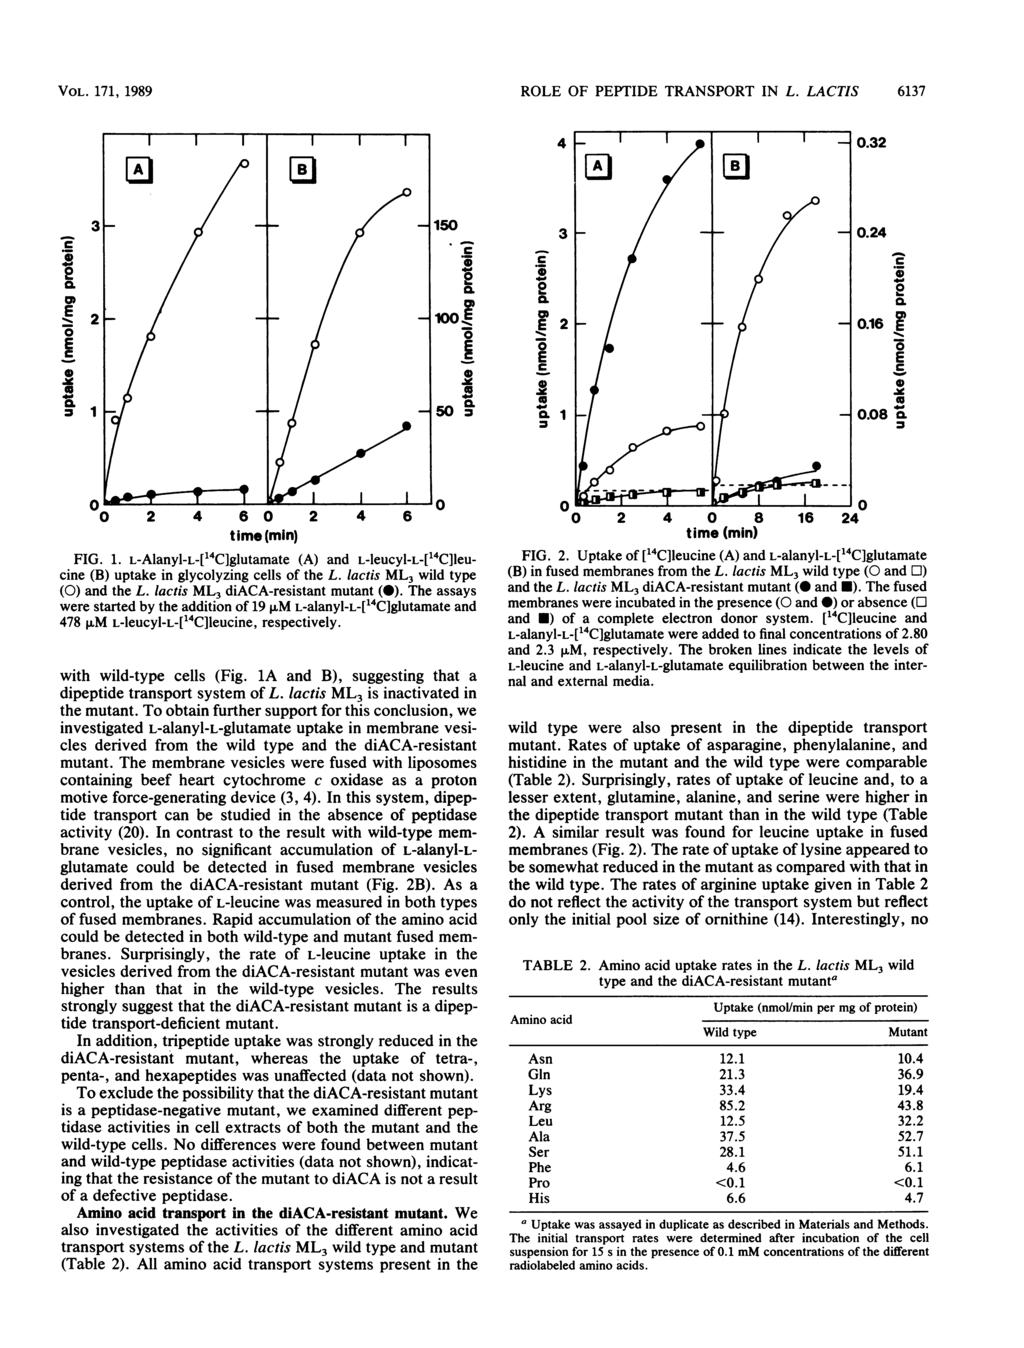 VOL. 171, 1989 ROL OF PPTID TRANSPORT IN L. LACTIS 6137 4 _ ' ' 0.32 3-0.24 L CL 0.0 2 00 c ~~~~~~~~~~0 2 4 0 8 16 20.16 0 J 0 2 4 6 0 2 4 6 time (min) FIG. 1. L-Alanyl-L-['4C]glutamate (A) and L-leucyl-L-[14C]leucine (B) uptake in glycolyzing cells of the L.